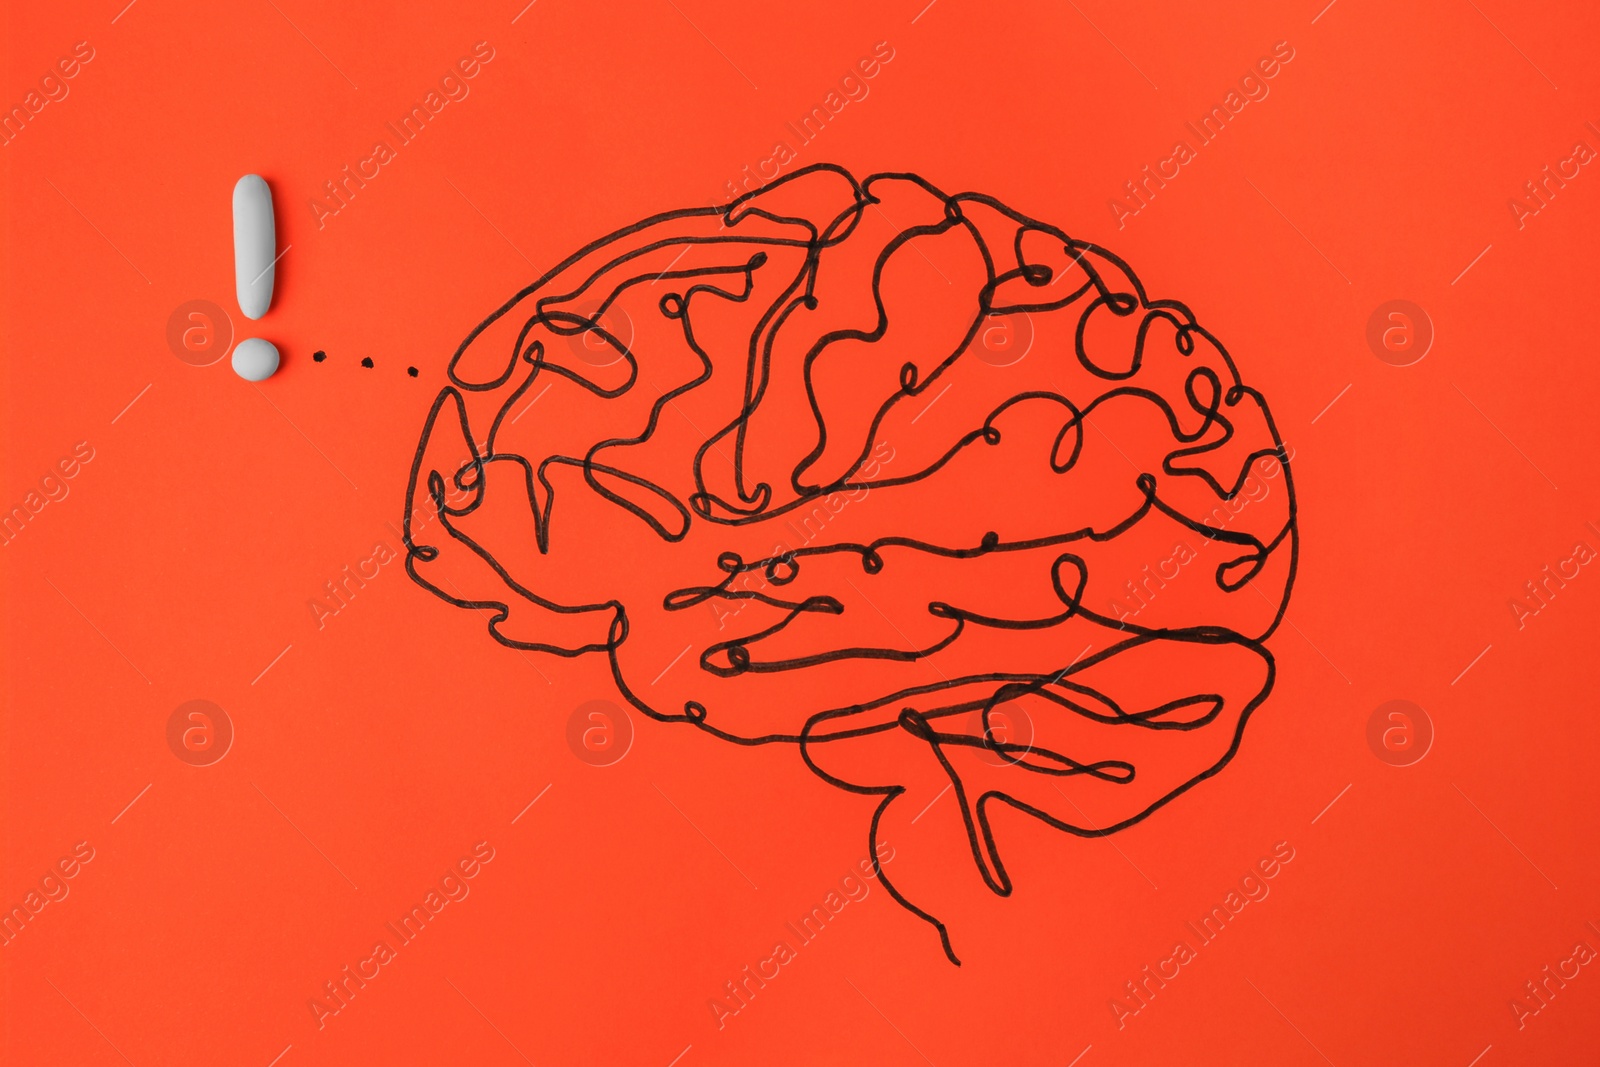 Photo of Drawn brain and white exclamation mark as solution idea on red background, flat lay